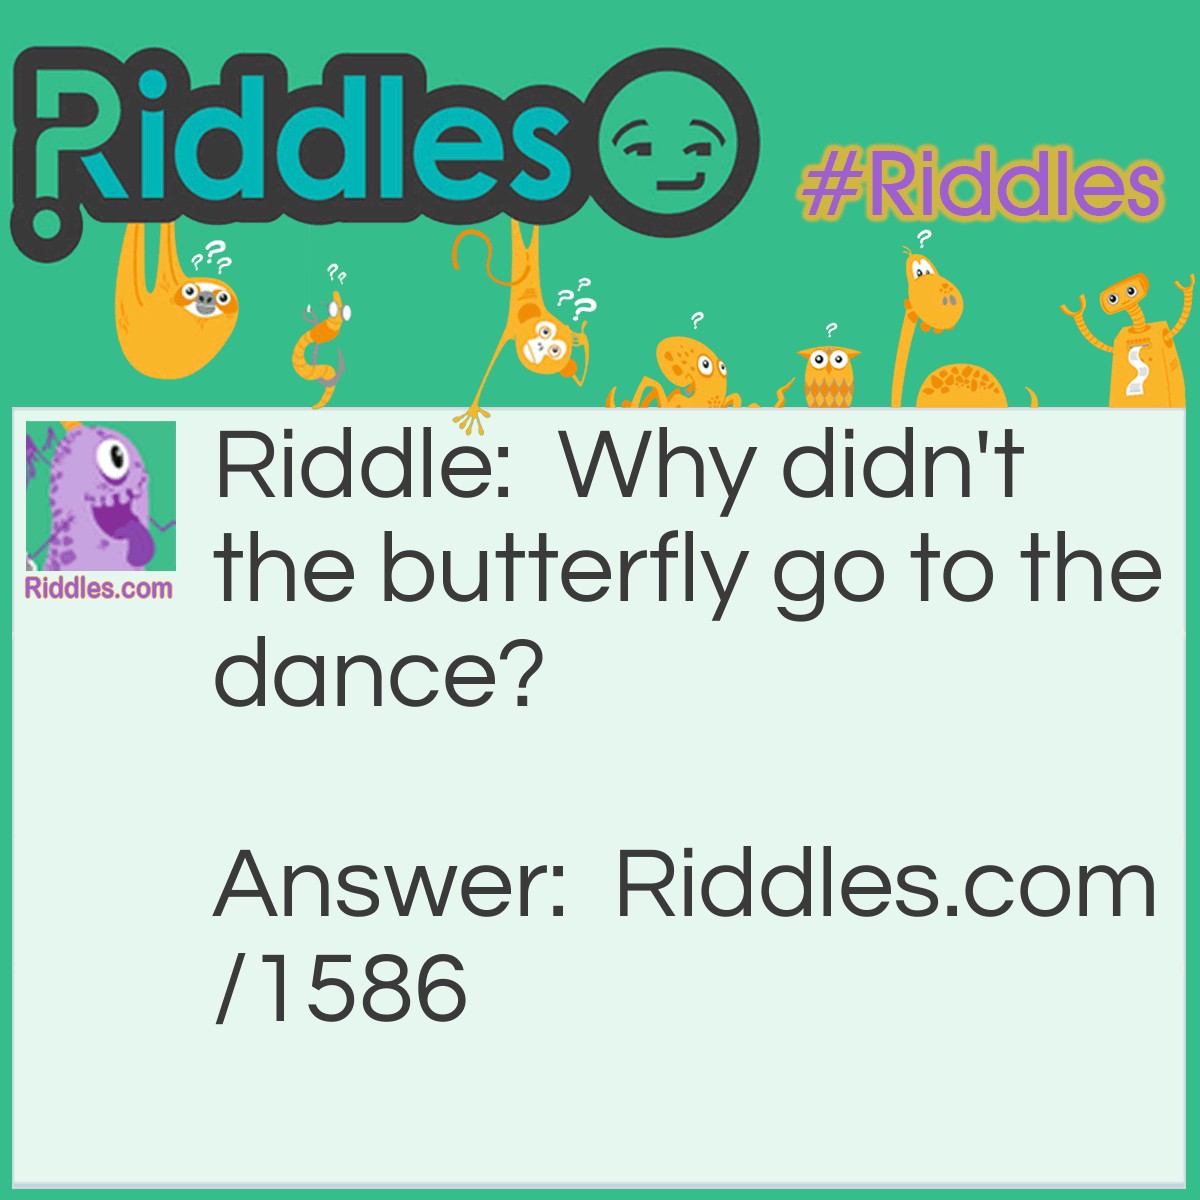 Riddle: Why didn't the butterfly go to the dance? Answer: Beacause it was a moth ball.